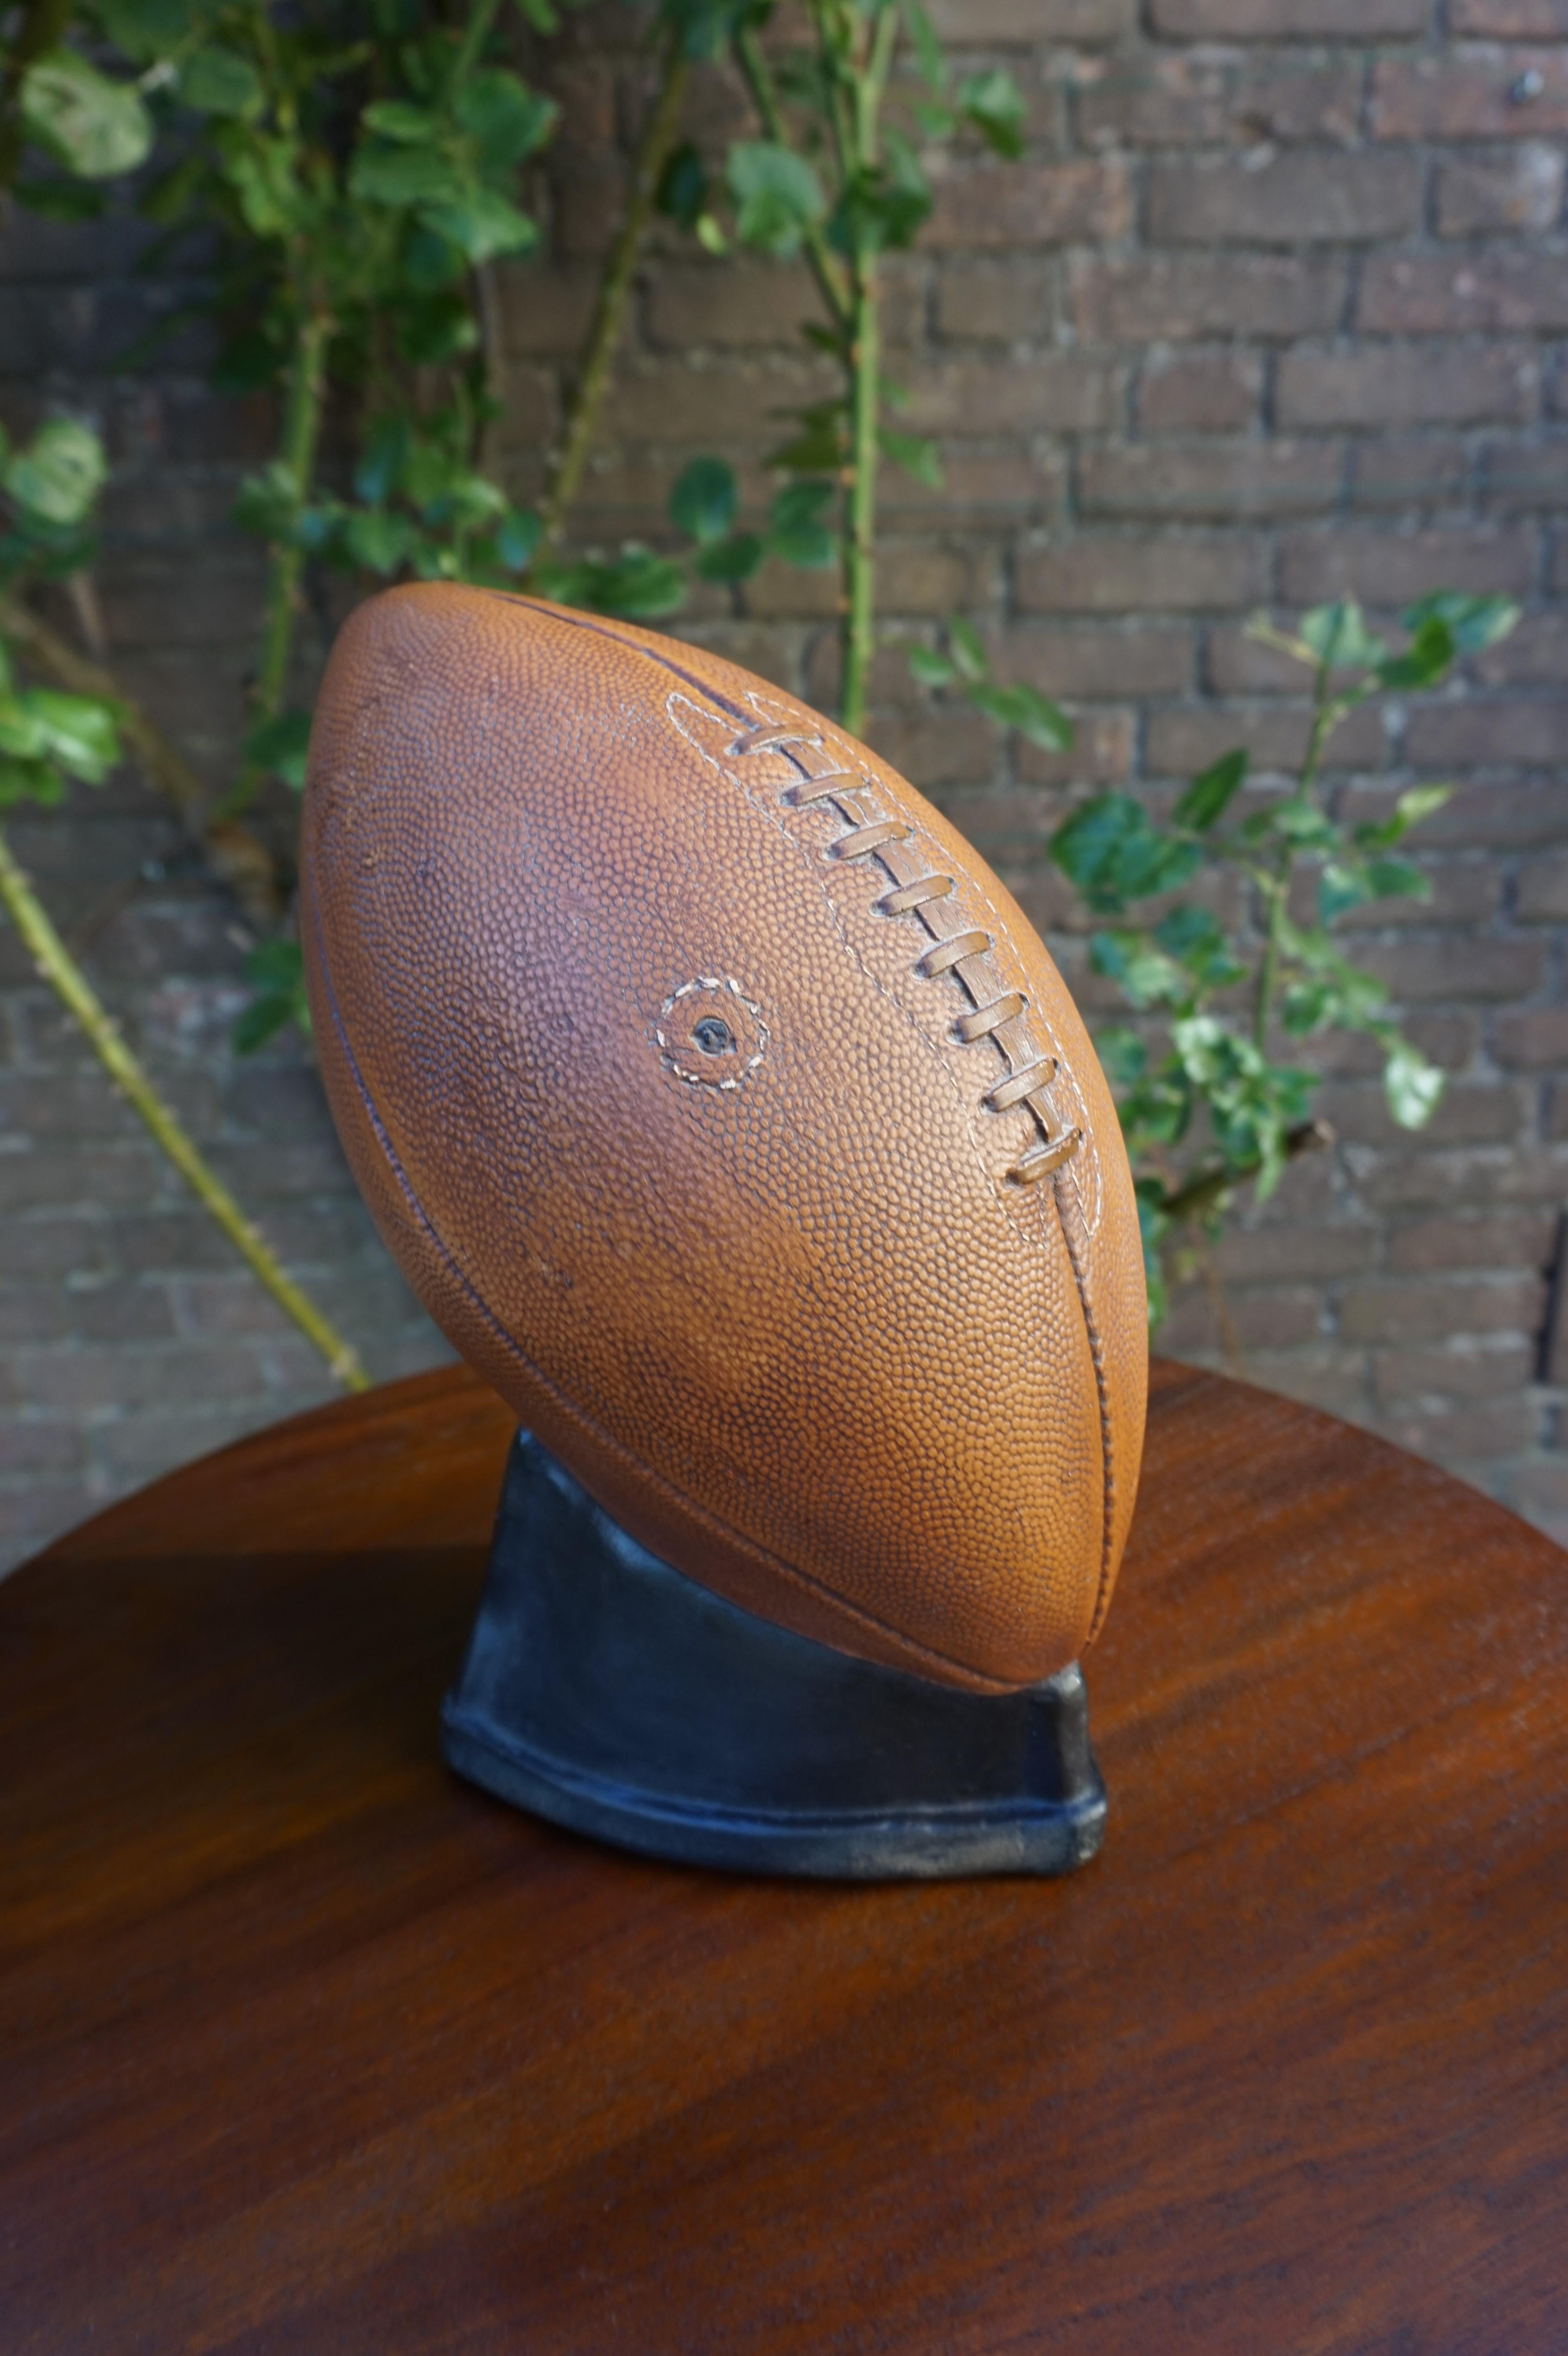 Cast Vintage & Very Realistic Football Money Box Moneybox of Hand-Painted Plaster